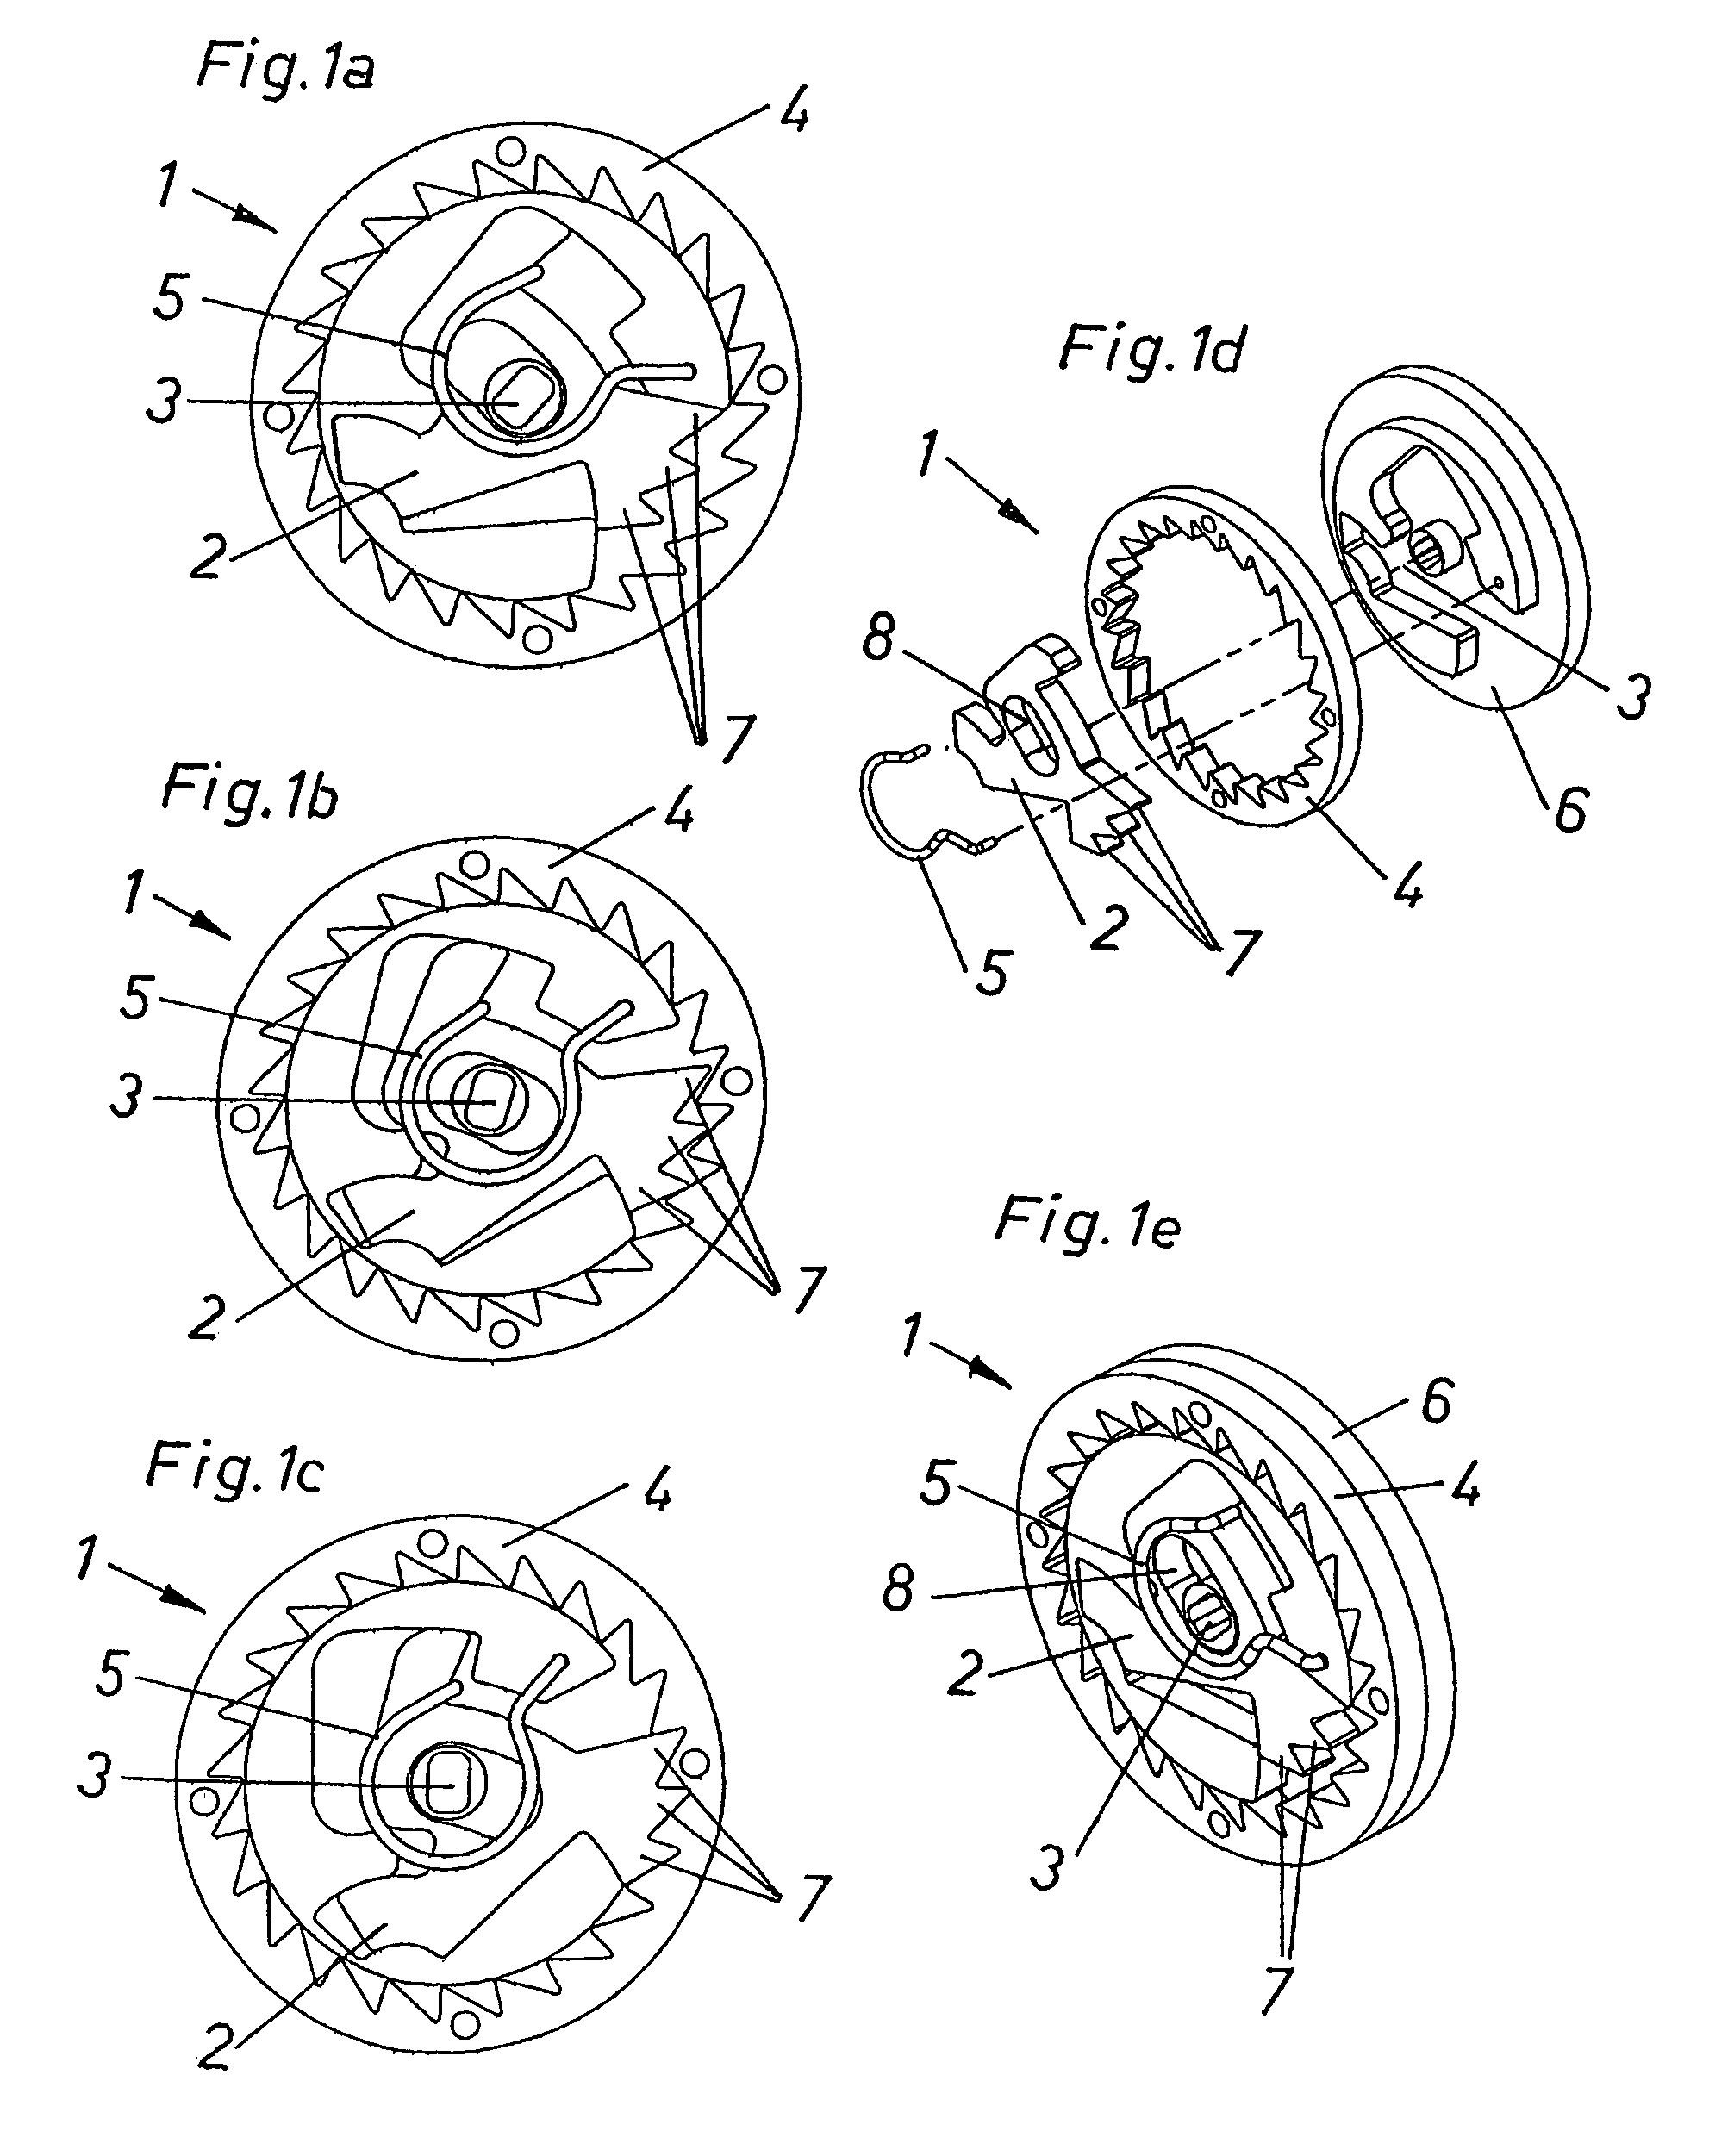 Actuating device with at least one actuating arm